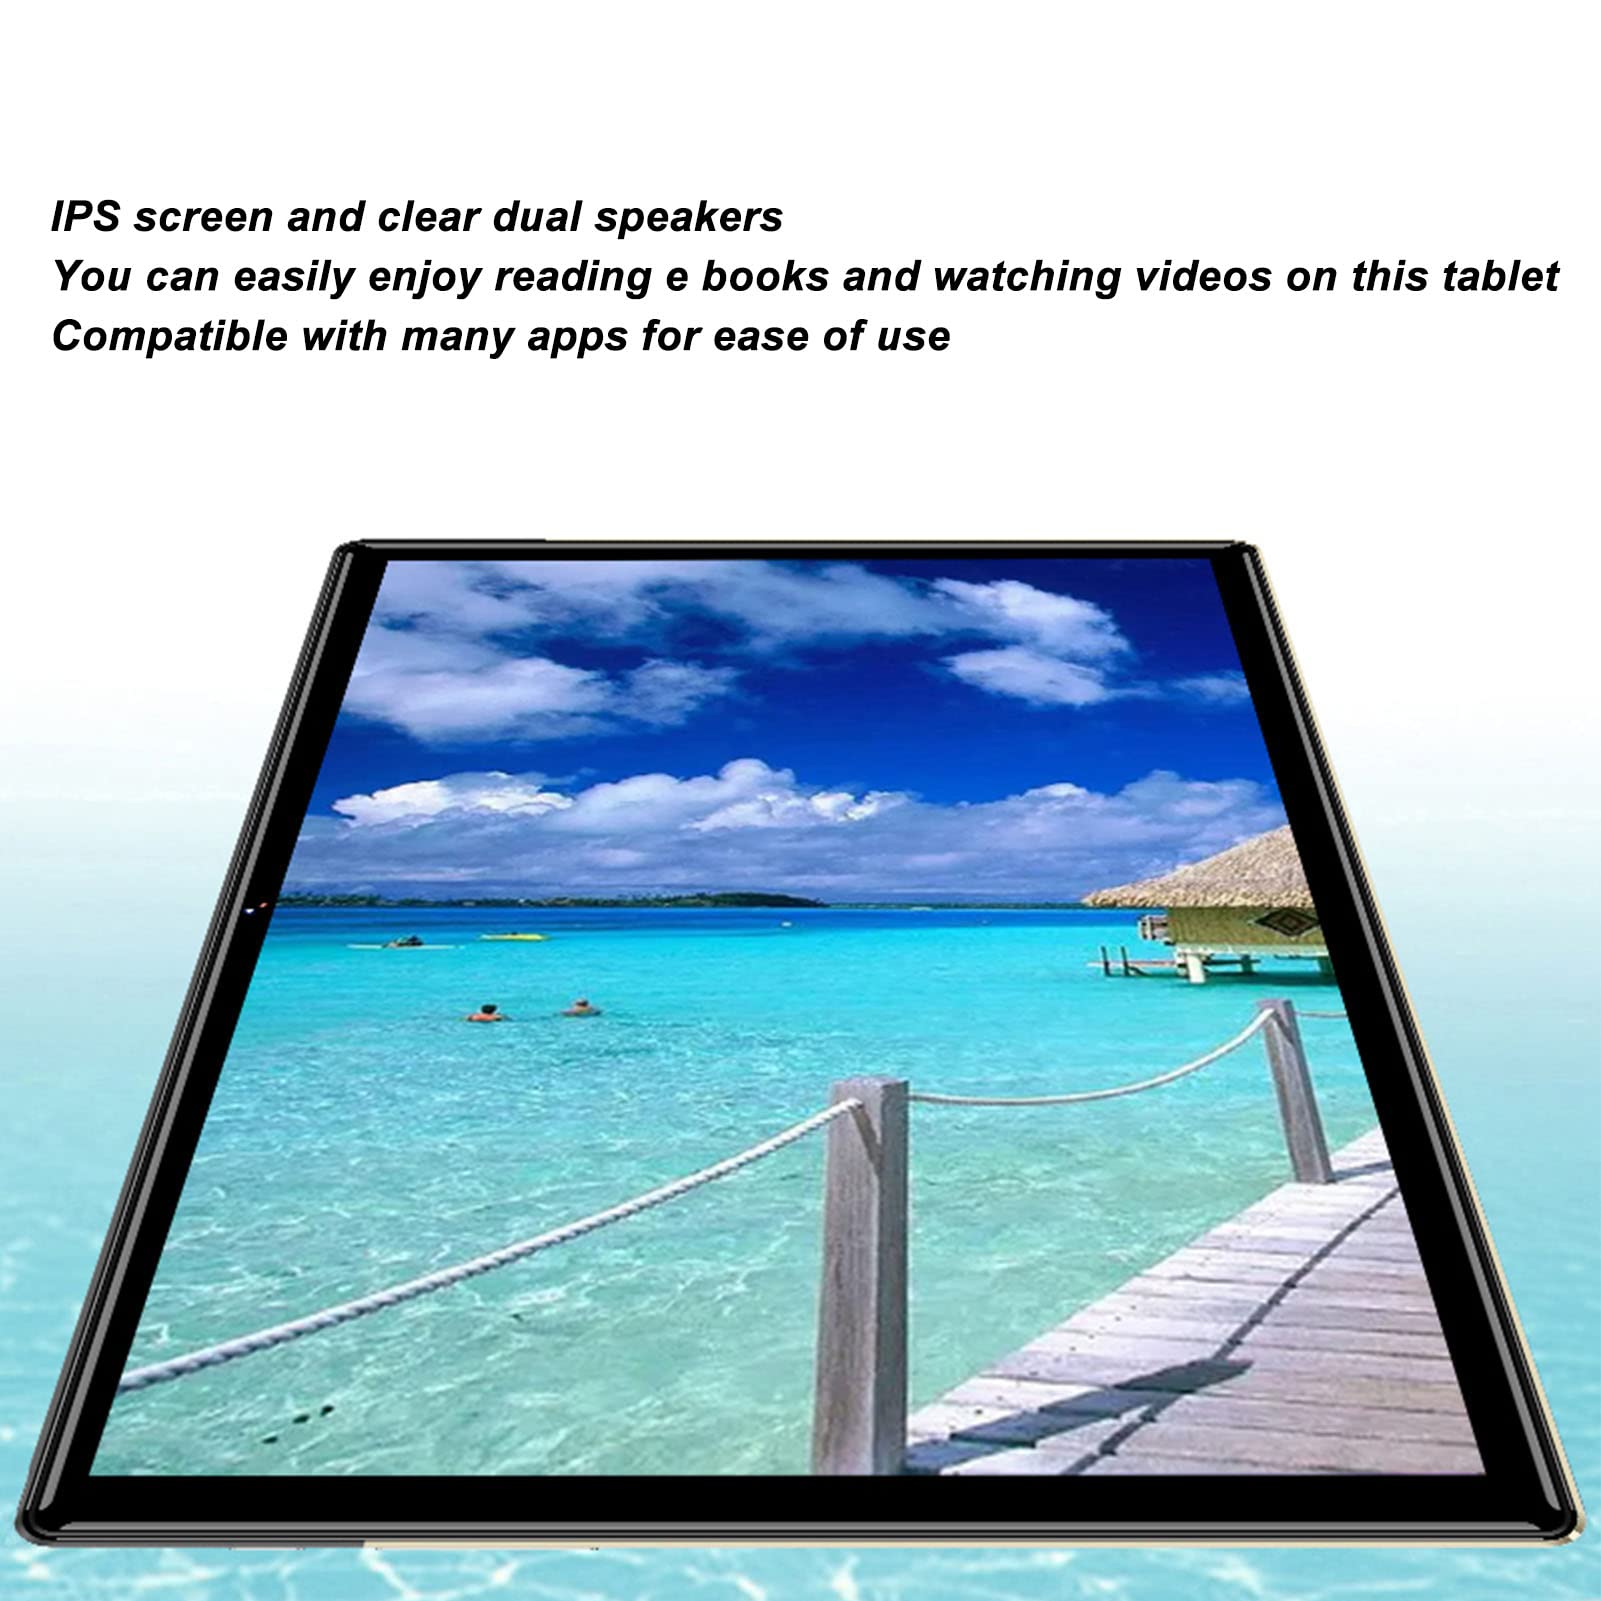 Pomya Tablet PC Android12 10 Inch, 8GB RAM 256GB ROM 128G Expand, 4G LTE Cellular Tablet with 8 Core CPU 5G WiFi, 7000mAh Fast Charging, Dual Speaker Dual Camera SIM Card Slots